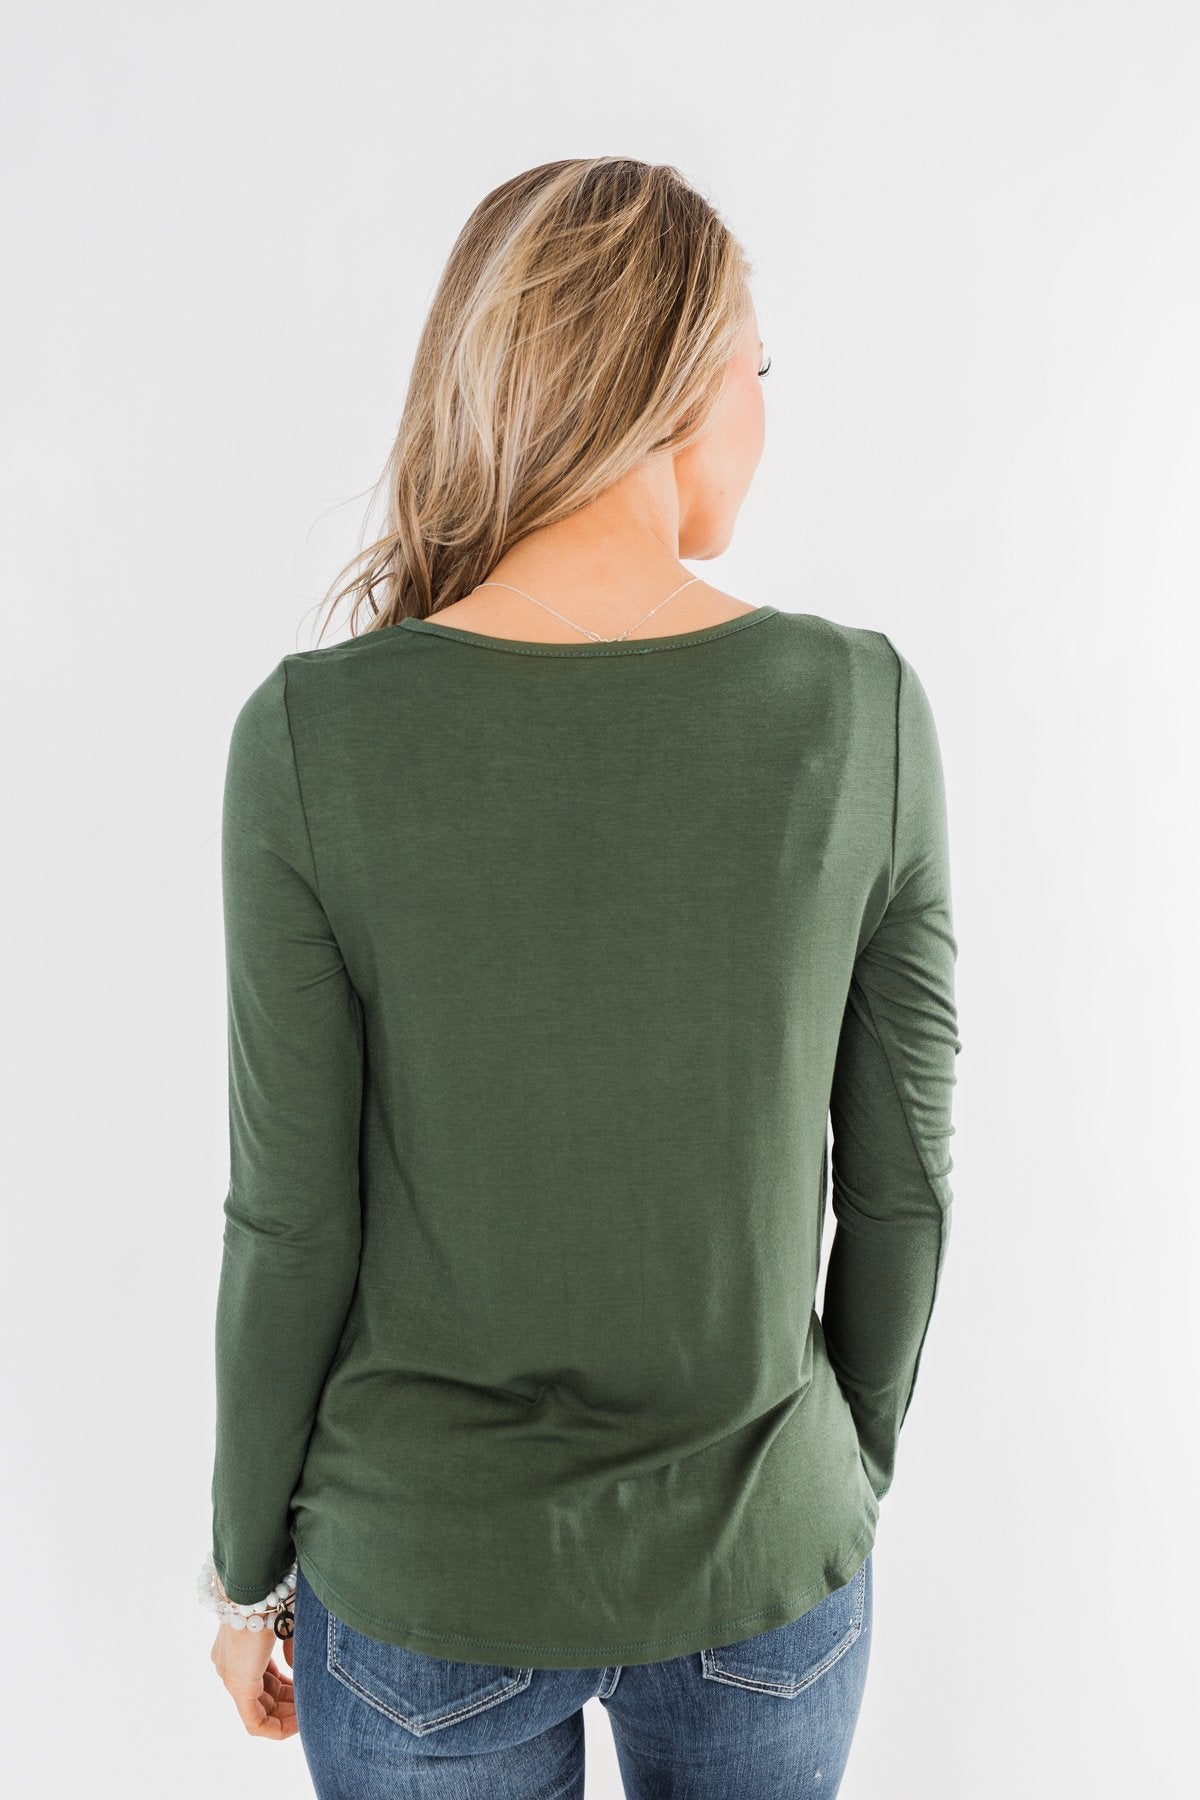 Left Me Speechless Wrap Button Top- Olive